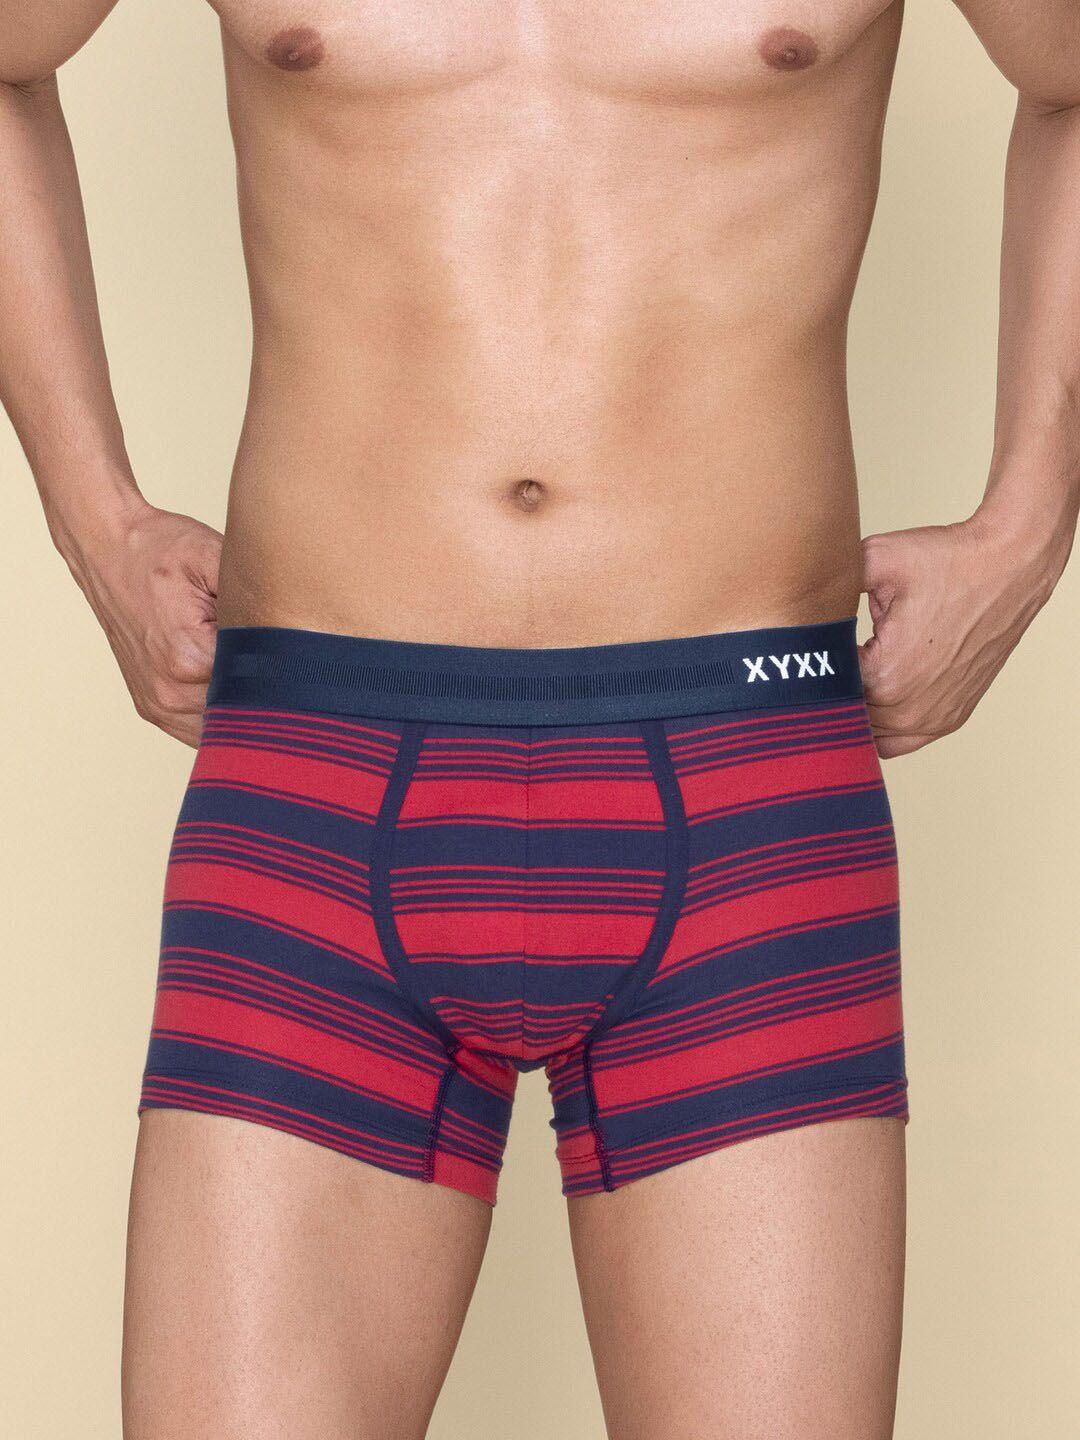 xyxx men striped combed cotton streax trunks xytrnk143